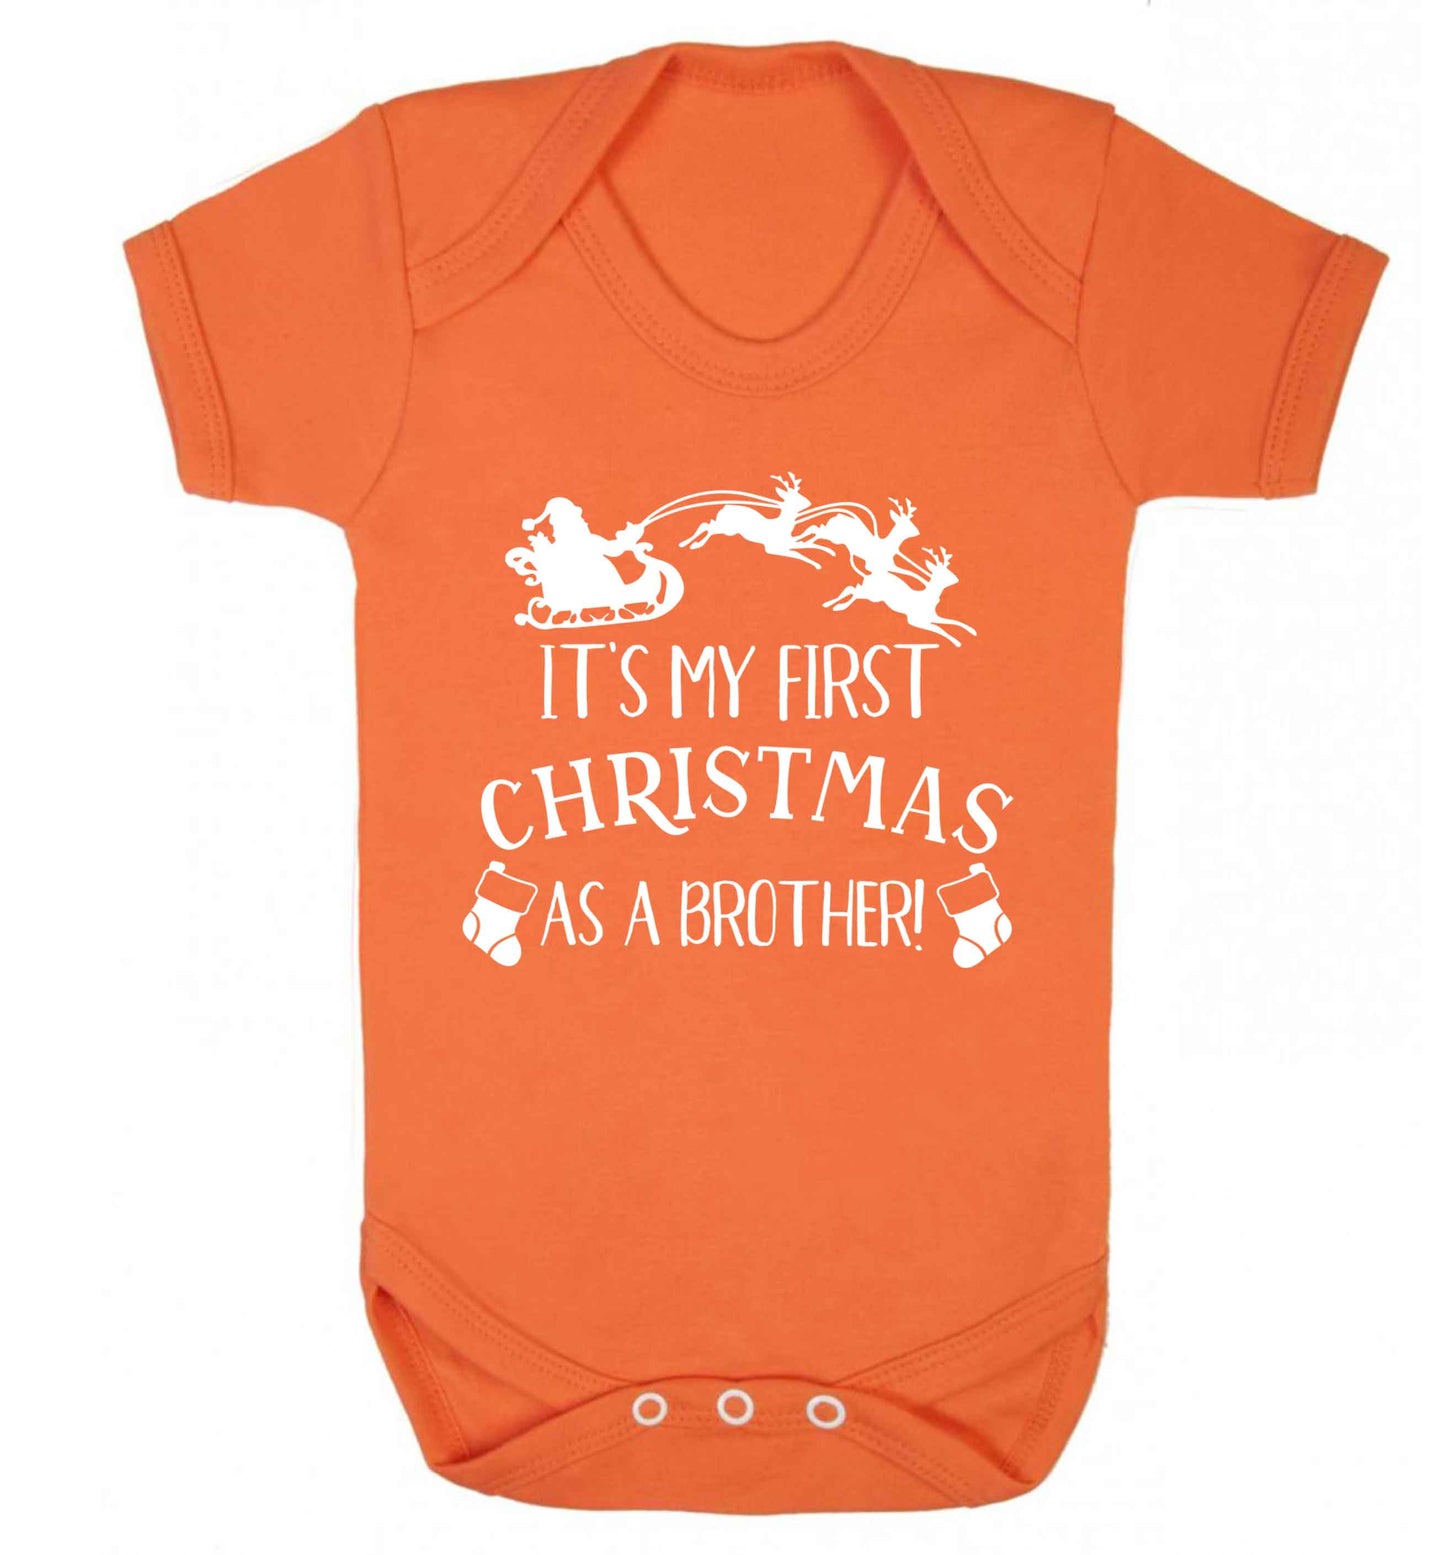 It's my first Christmas as a brother! Baby Vest orange 18-24 months